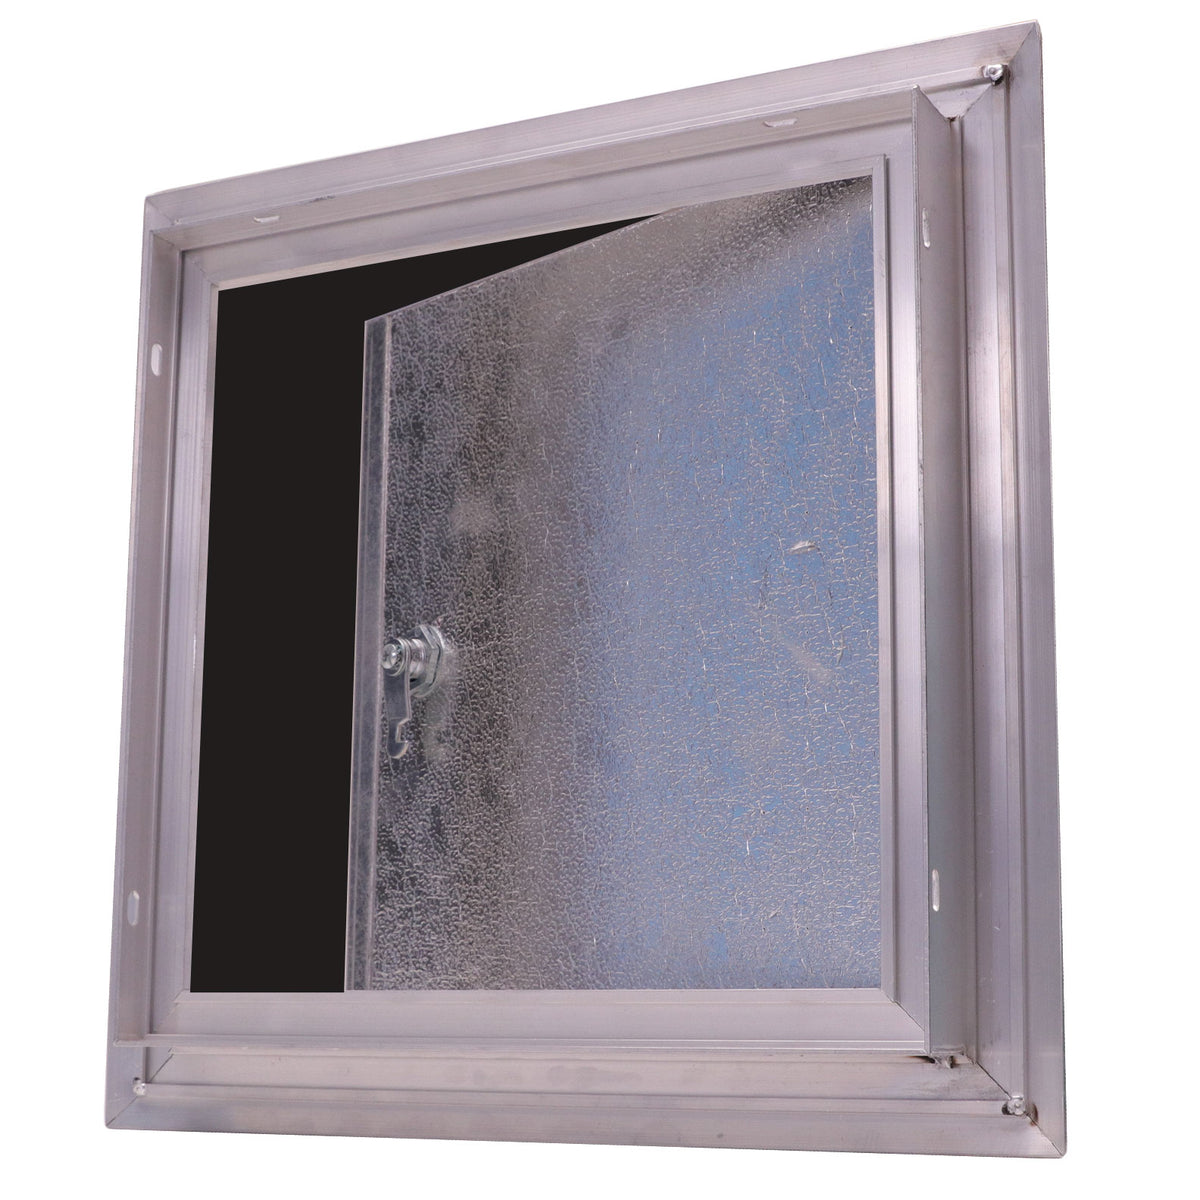 12&quot; X 12&quot; Aluminum Color Insulated Fire Rated Access Panel Door For Wall / Ceiling Application (Lock and Key) With Frame - [Outer Dimensions: 13&quot; Width X 13&quot; Height]